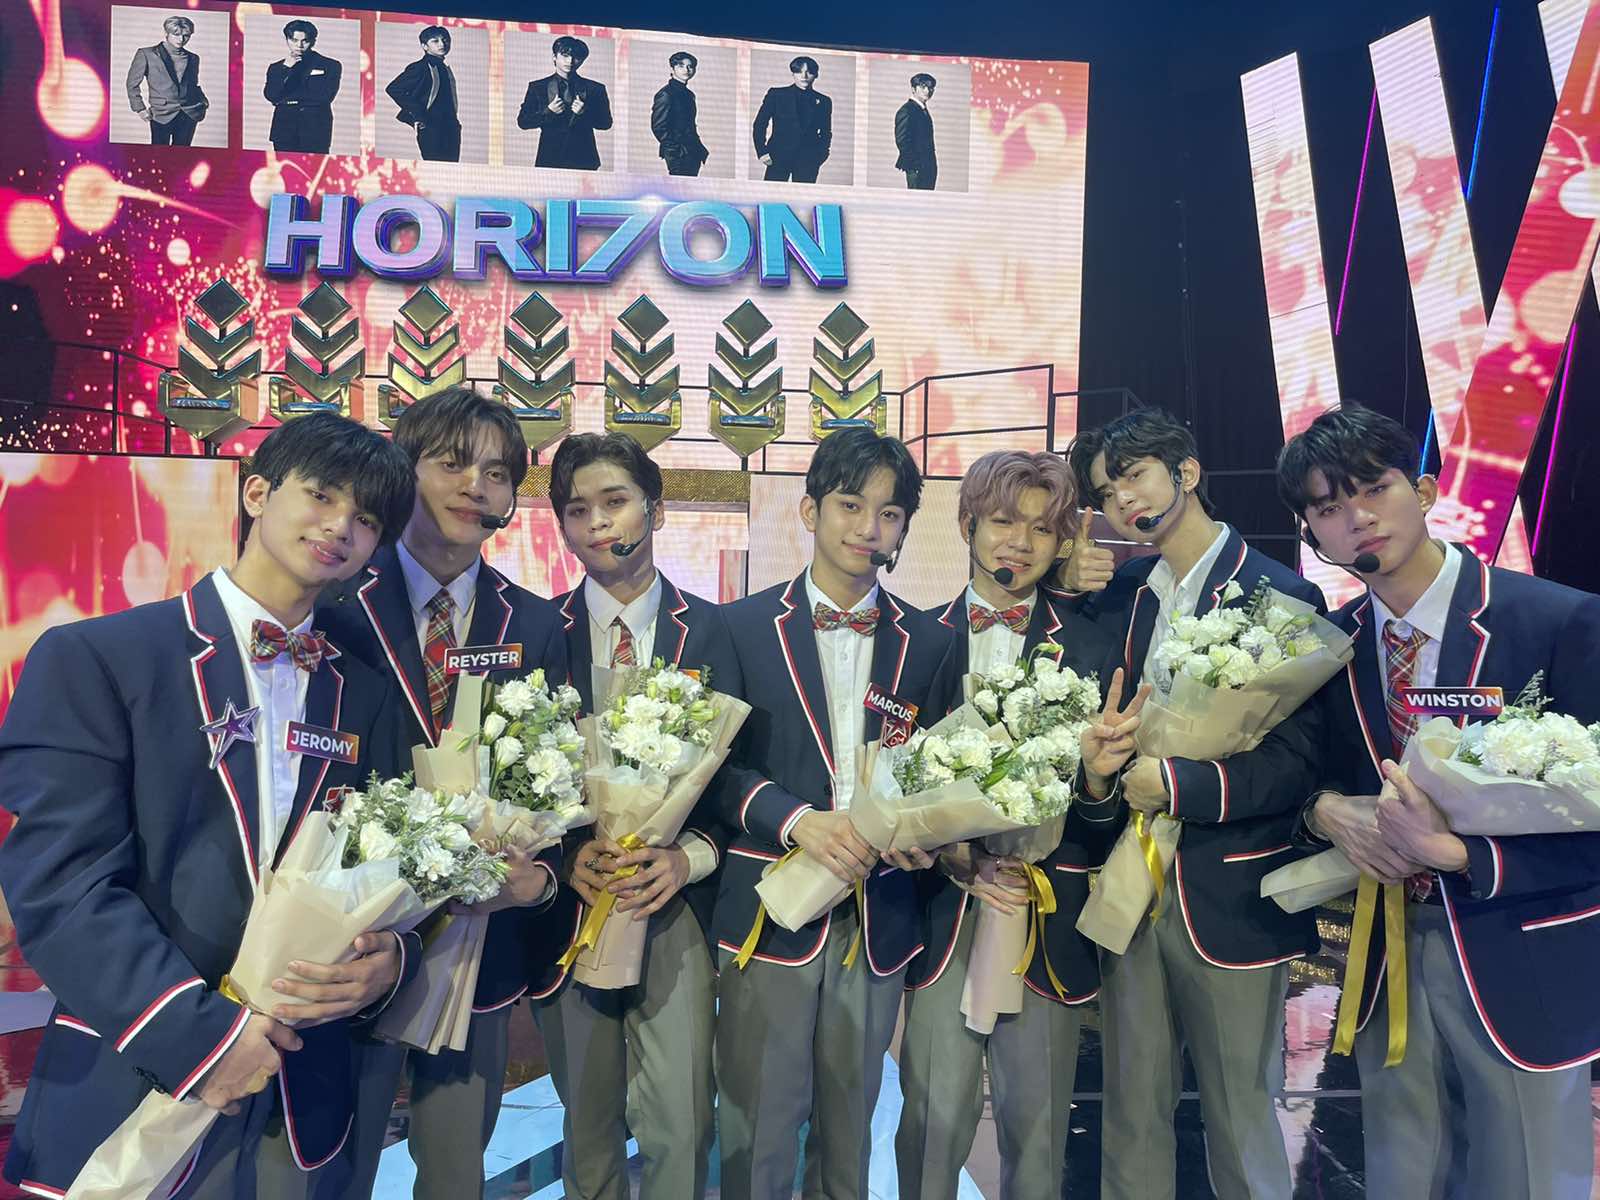 “Dream Maker” launches Top 7 winners as global pop group “HORI7ON”